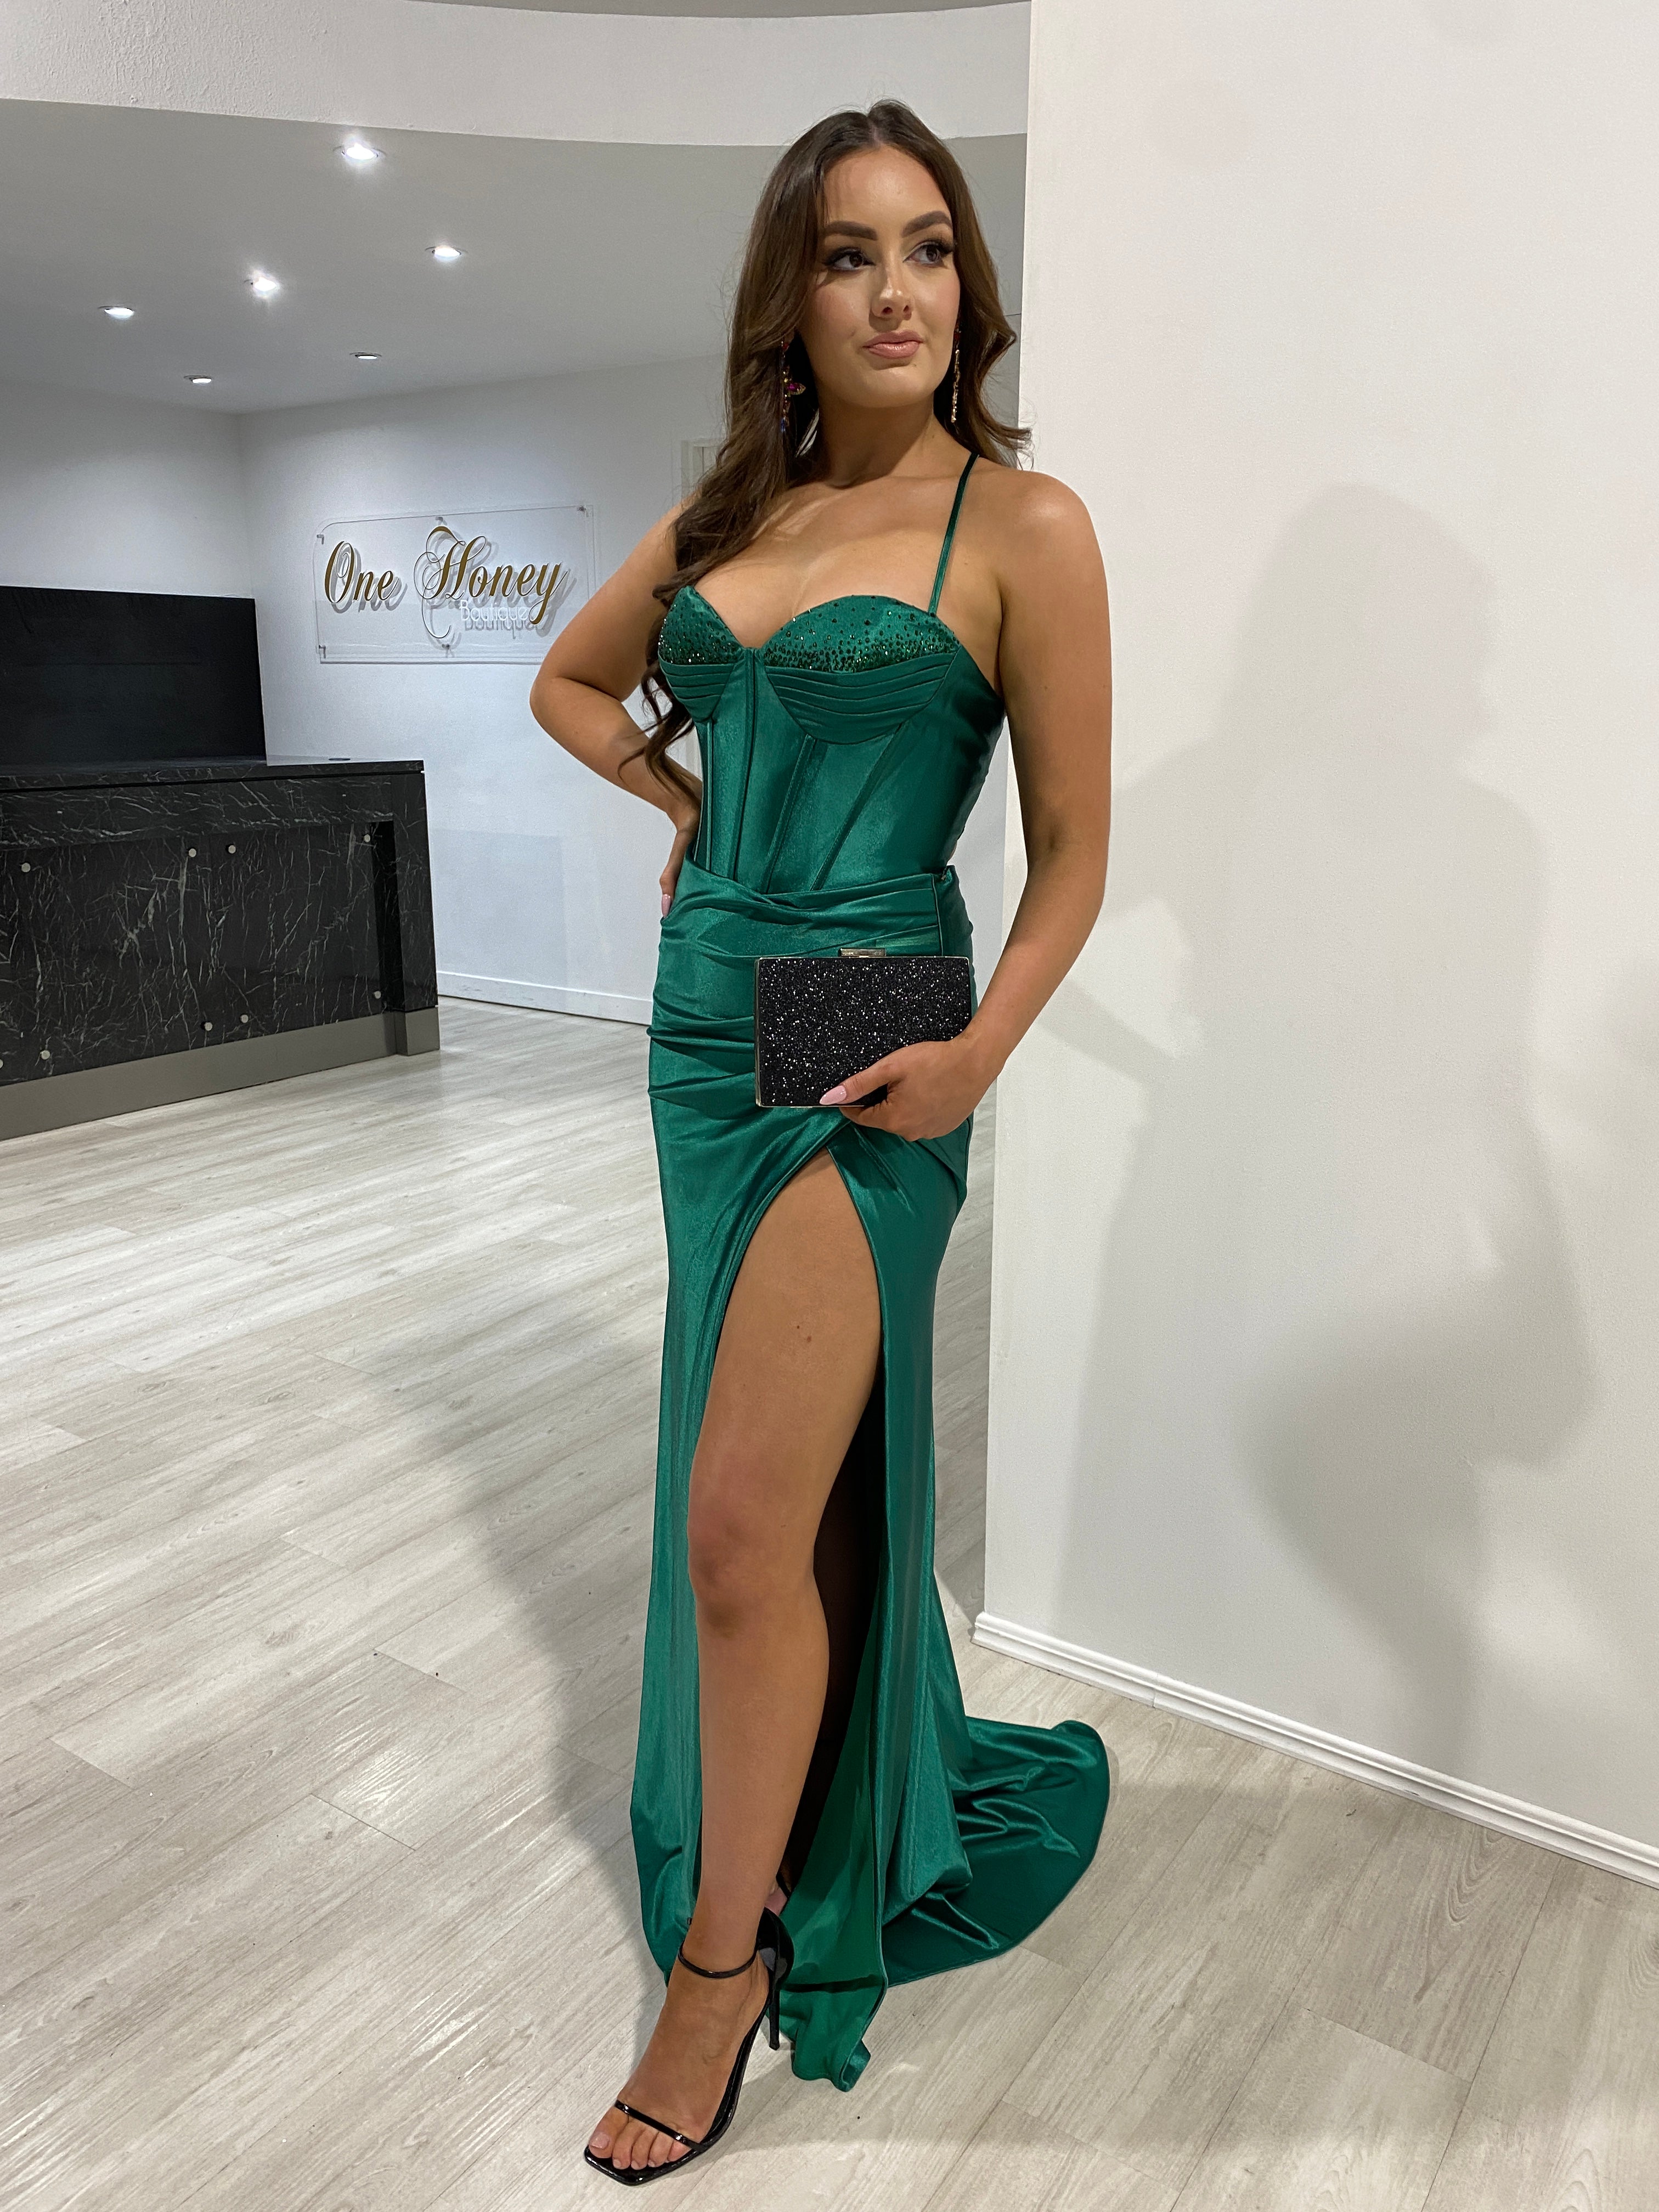 Honey Couture RAFAELLA Emerald Crystal Diamante Bustier Corset Lace Up Back Silky Mermaid Formal Dress (RED TAG FINAL SALE)